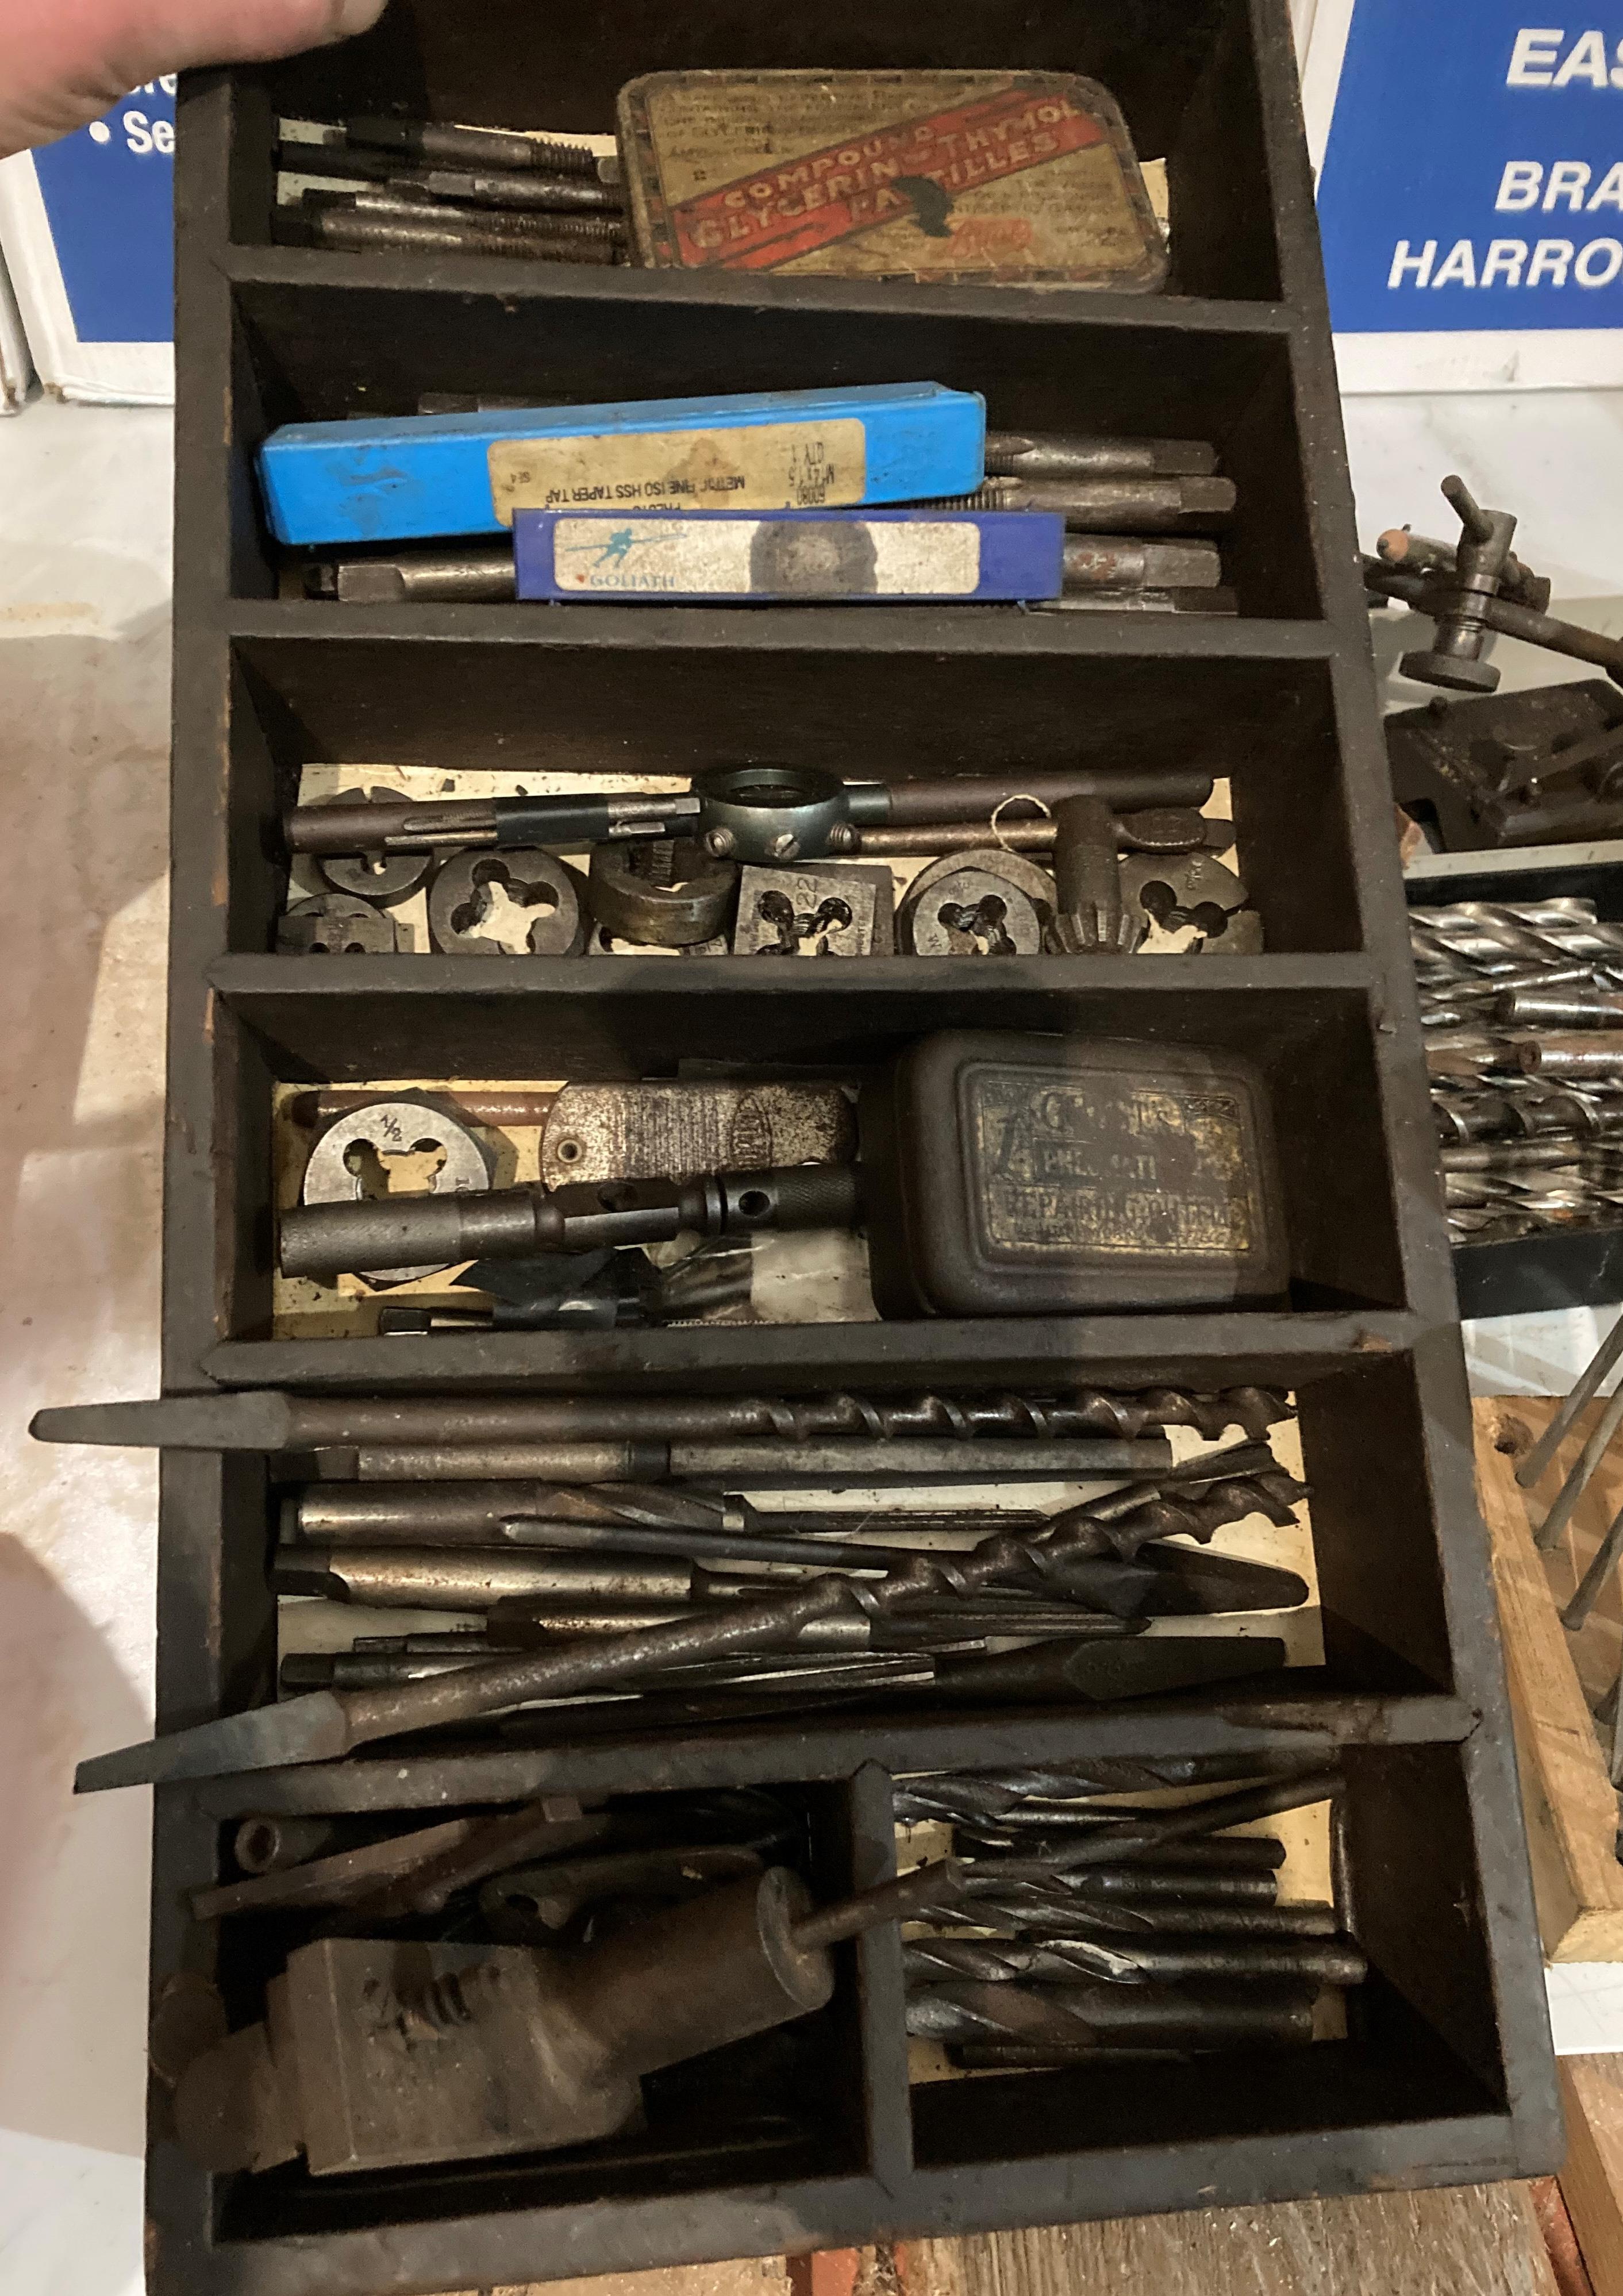 Contents to wooden tray - assorted tap and die bits, metal drill bit stand, files, - Image 2 of 3